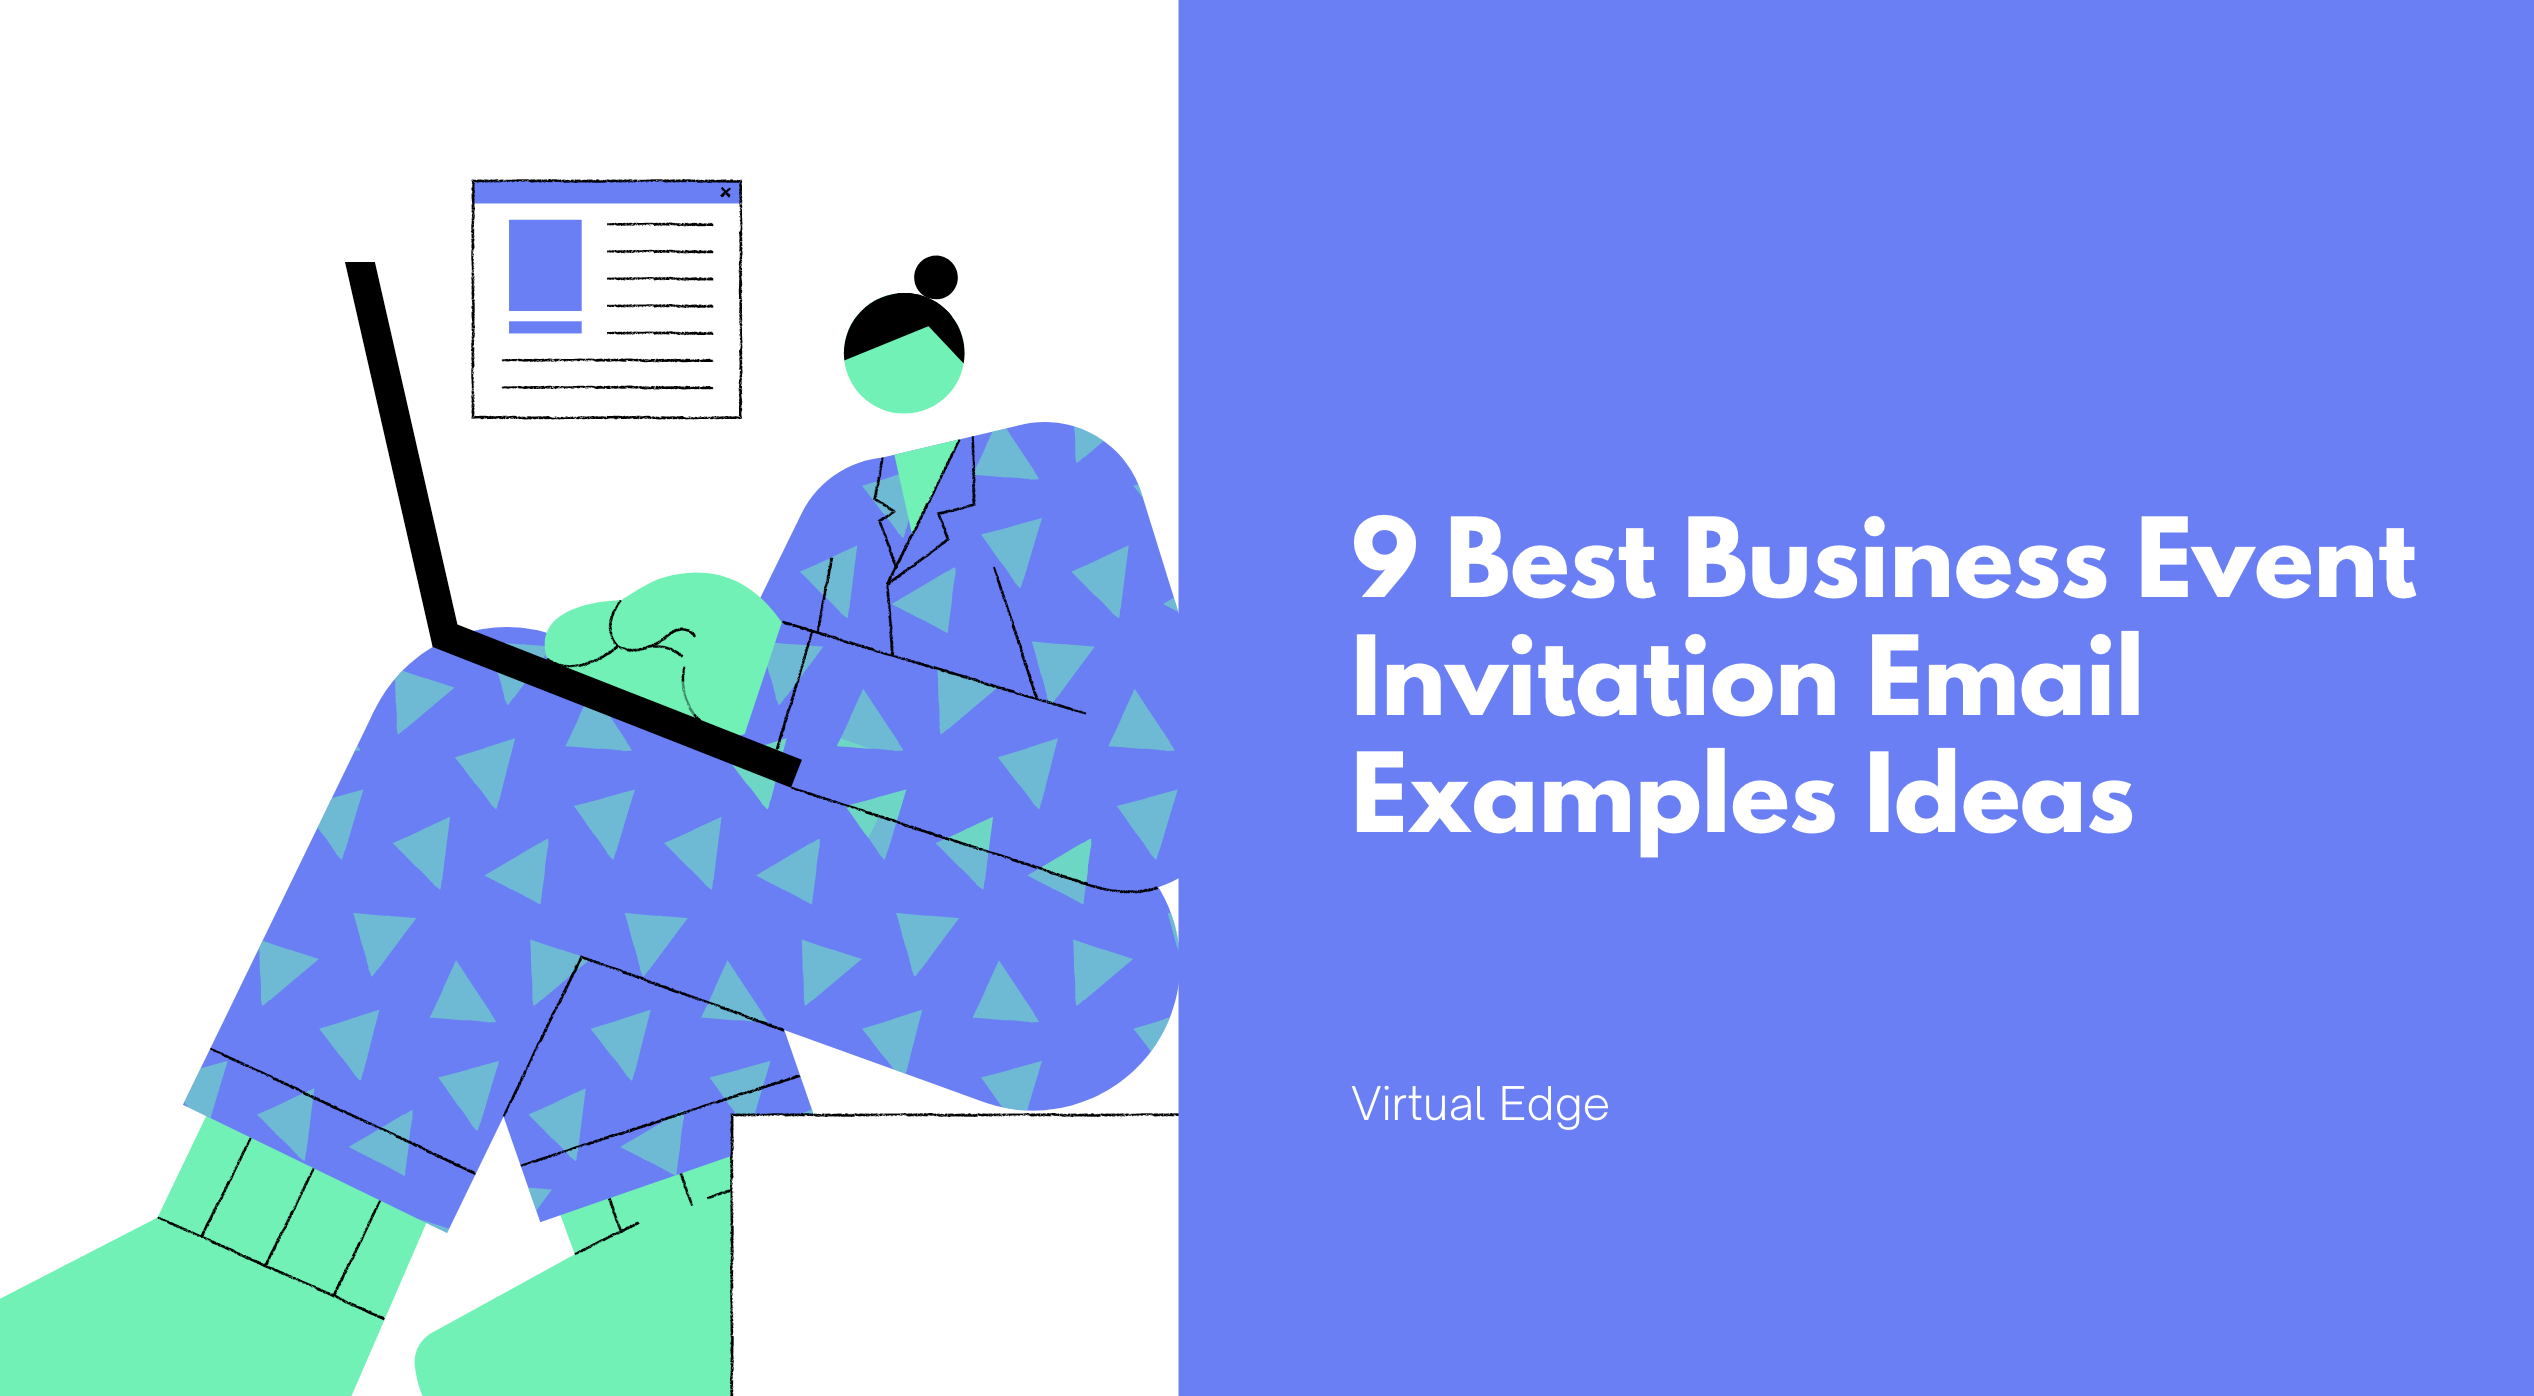 8 Best Business Event Invitation Email Examples Ideas  Virtual Edge